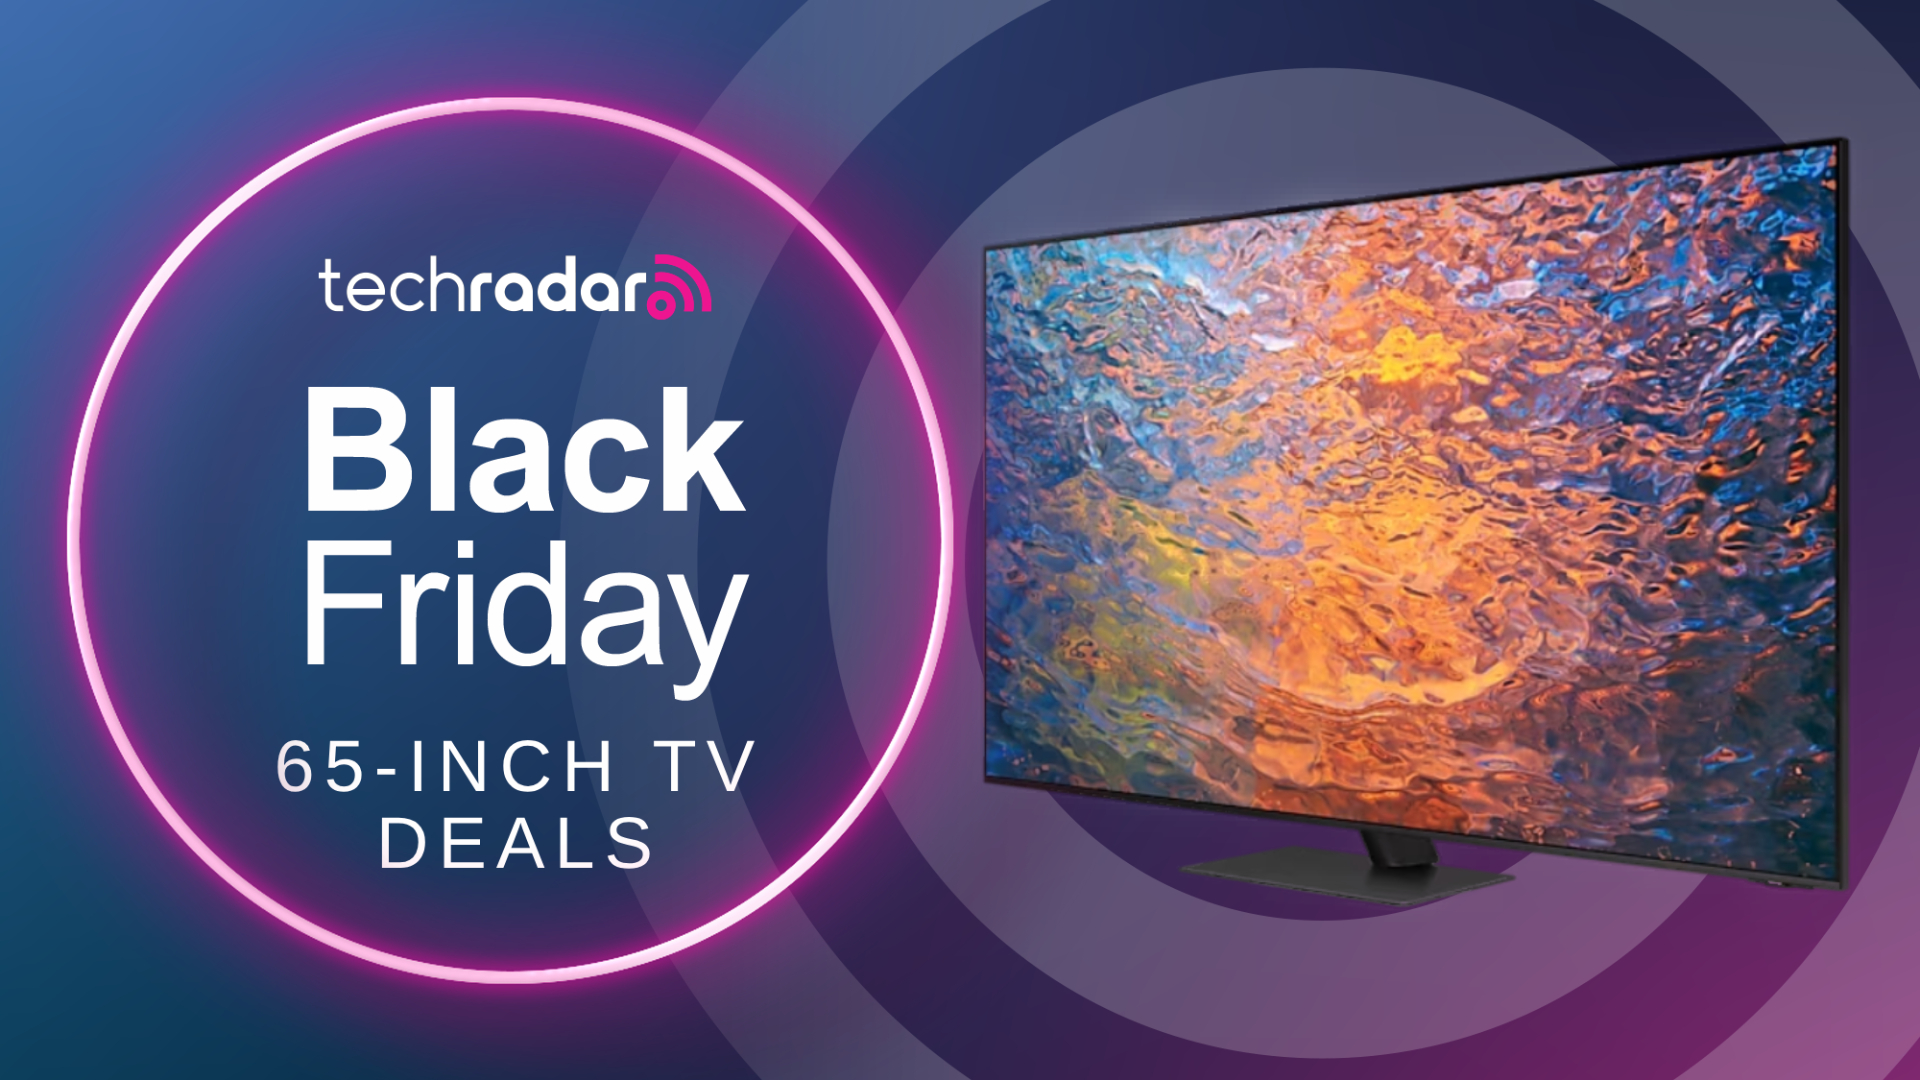 Don't wait – this limited-time deal on a Hisense 65-inch mini-LED 4K TV  drops its price to below $500